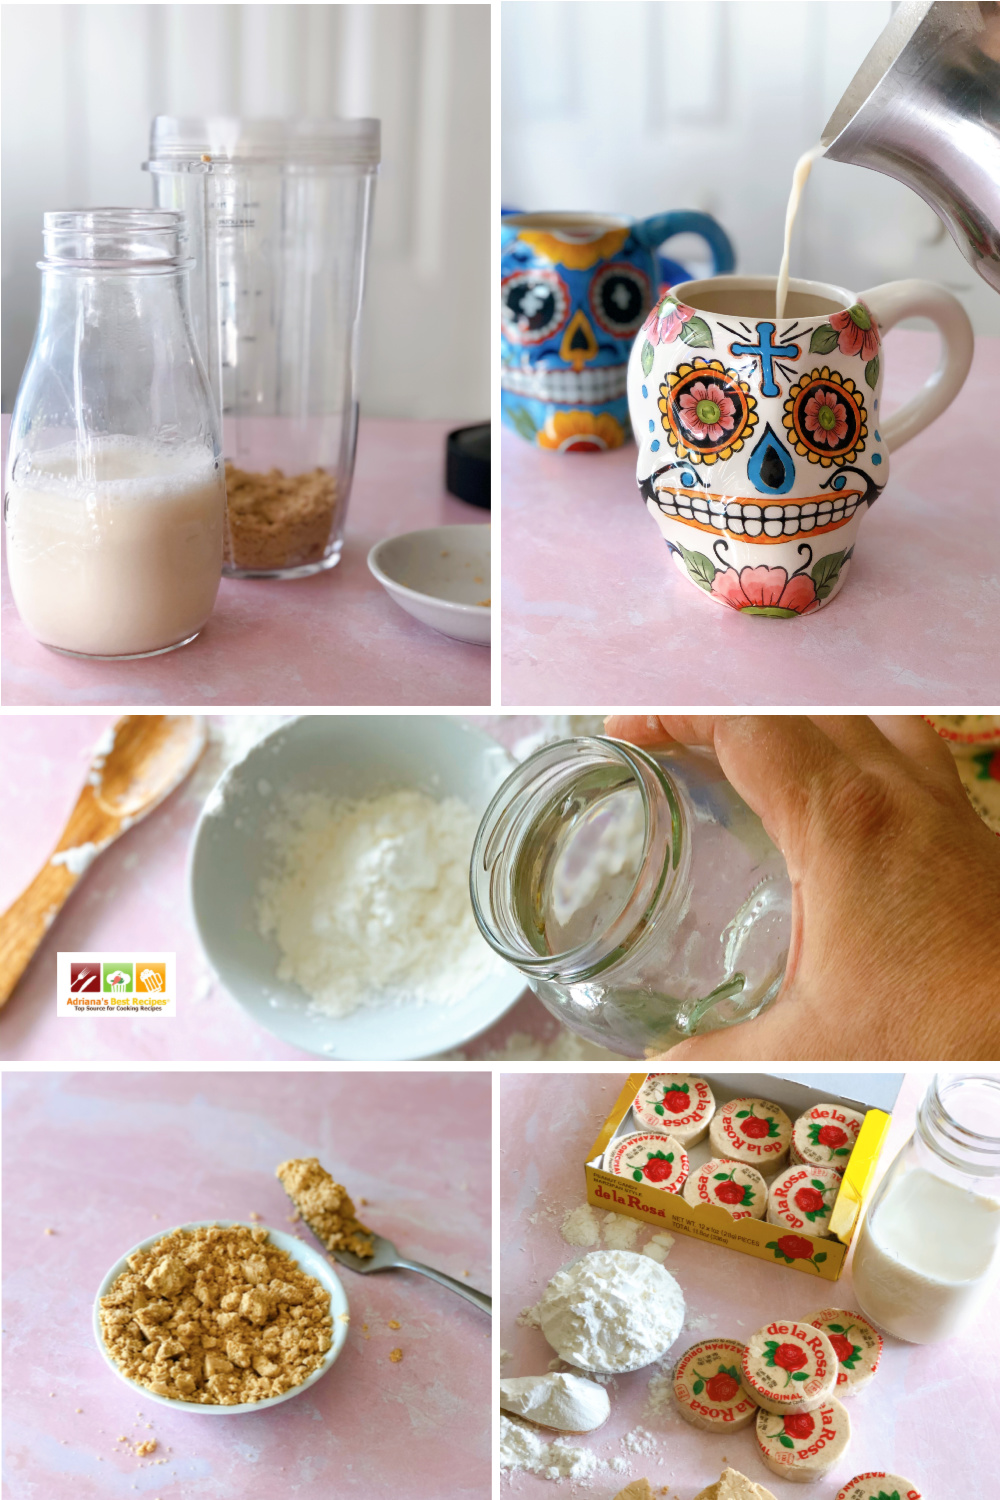 Step by step process on how to make the Mexican hot drink